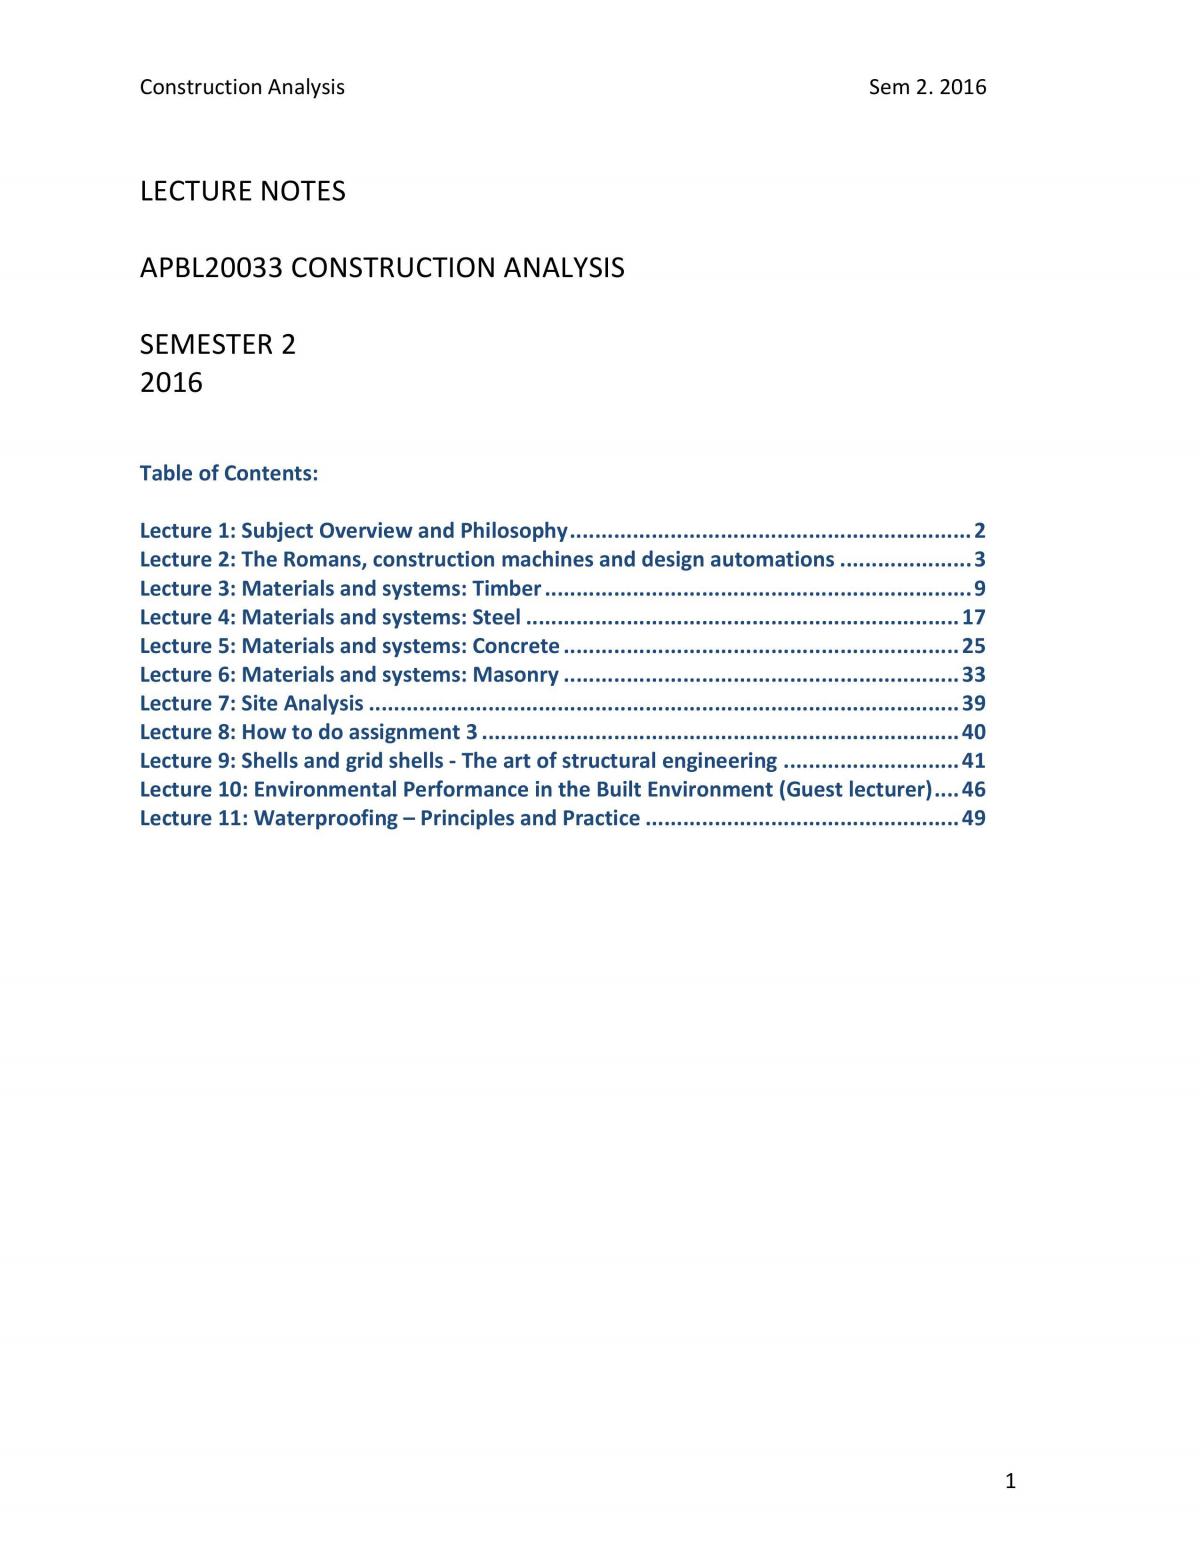 assignment 3 construction analysis